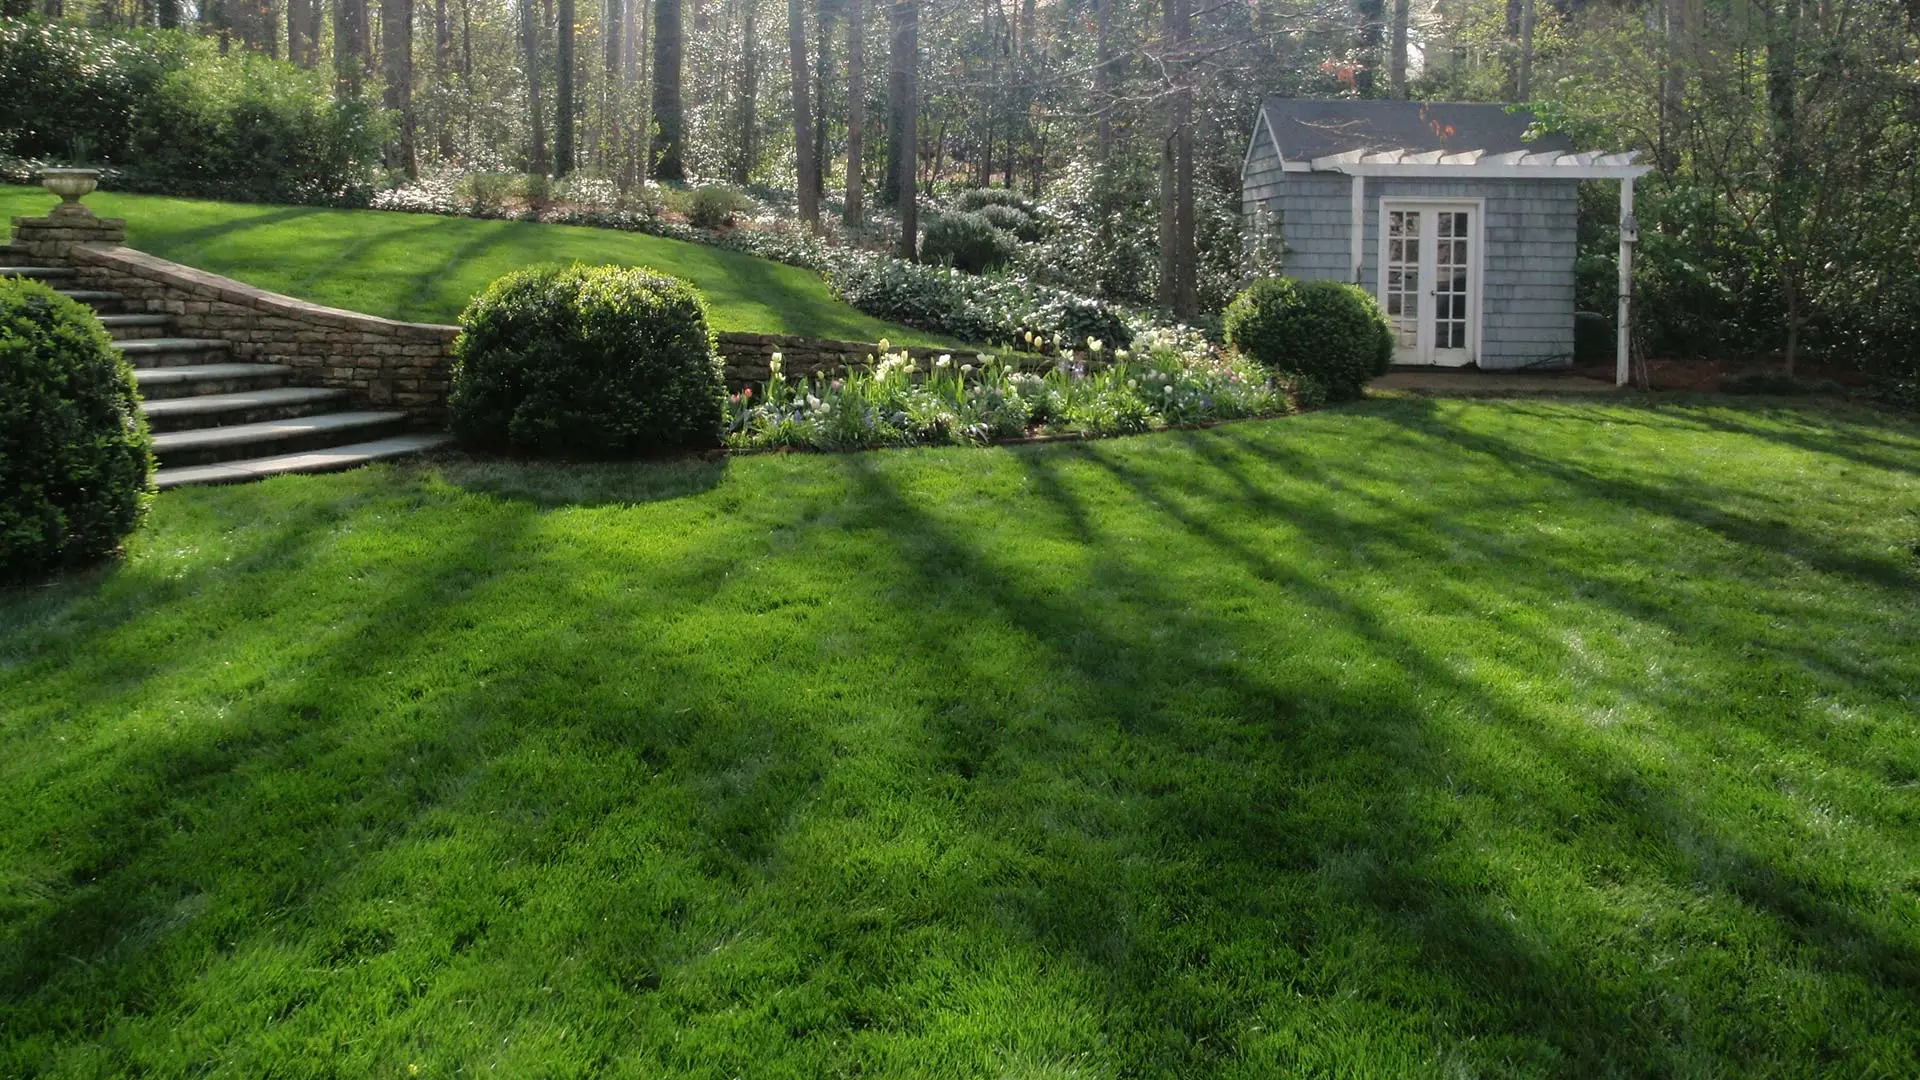 Residential backyard with recently mowed lawn and maintained landscaping in Buckhead, GA.